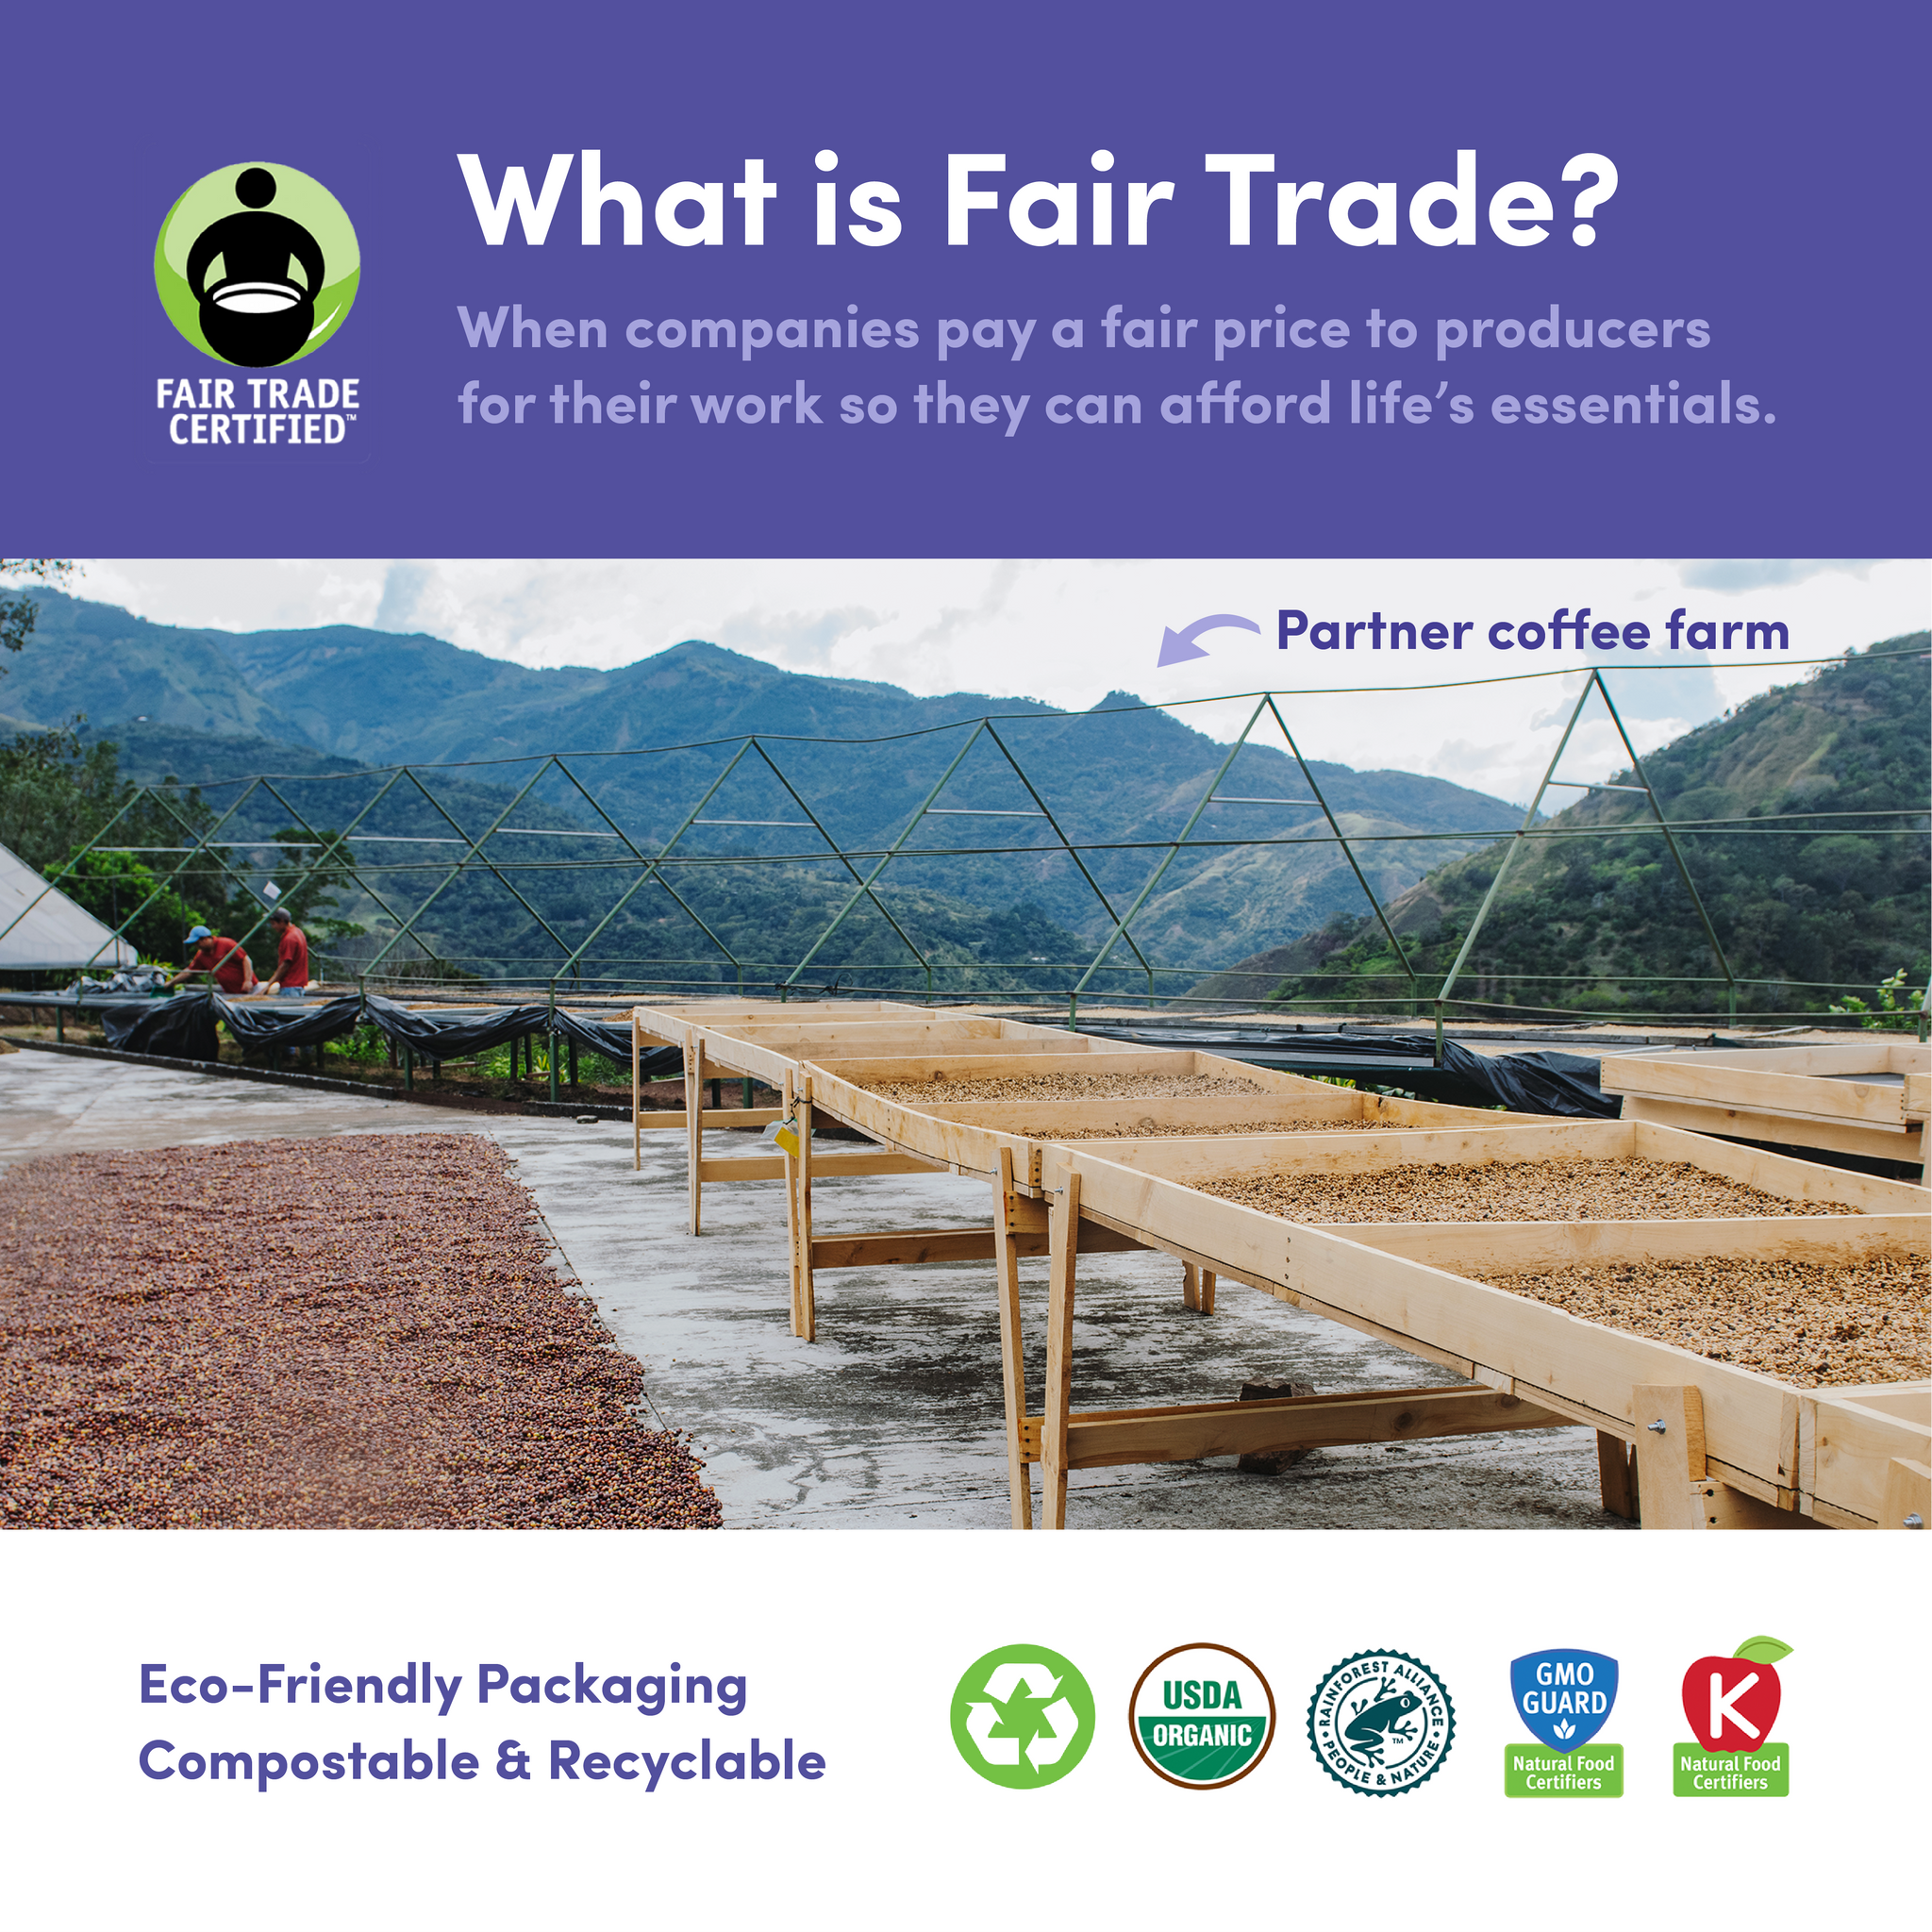 A photo of a coffee farm with rows of drying coffee beans in the background. In the foreground, there is a green banner with white text that reads ‘What is Fair Trade? When companies pay a fair price to producers for their work so they can afford life’s essentials.’ Below the banner, there are logos for eco-friendly packaging, USDA Organic, Non-GMO Project Verified, and Kosher